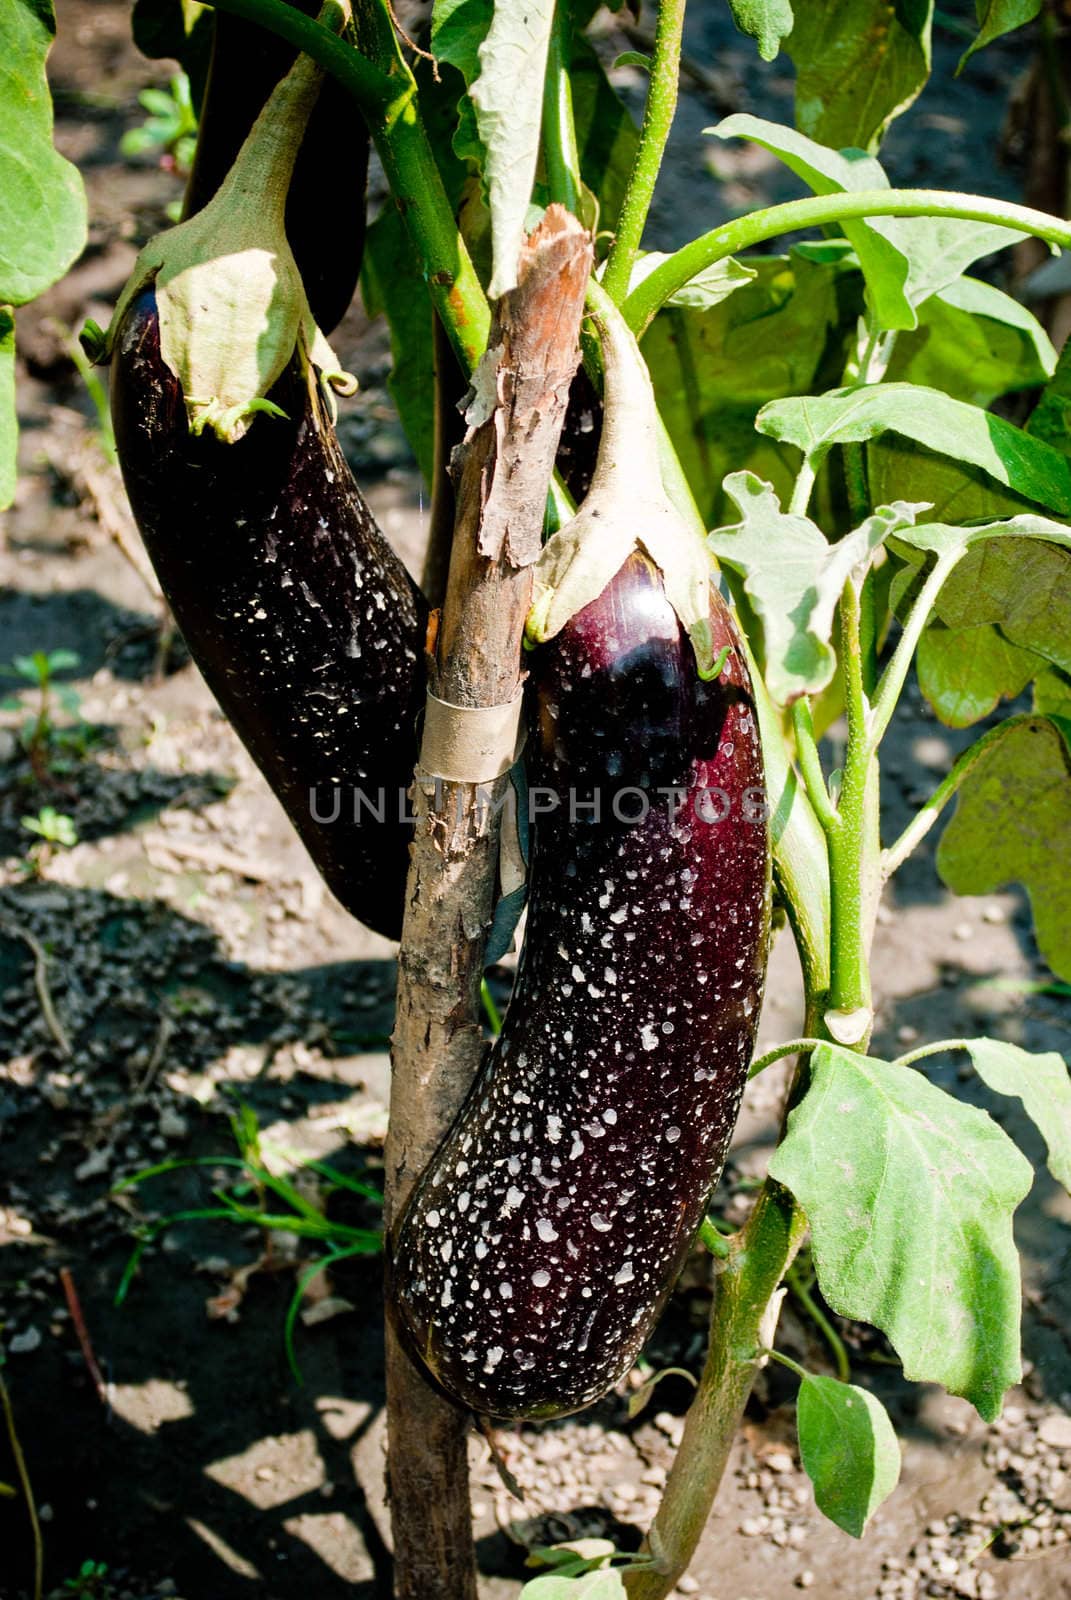 Fresh Eggplants in the garden after a rainy day